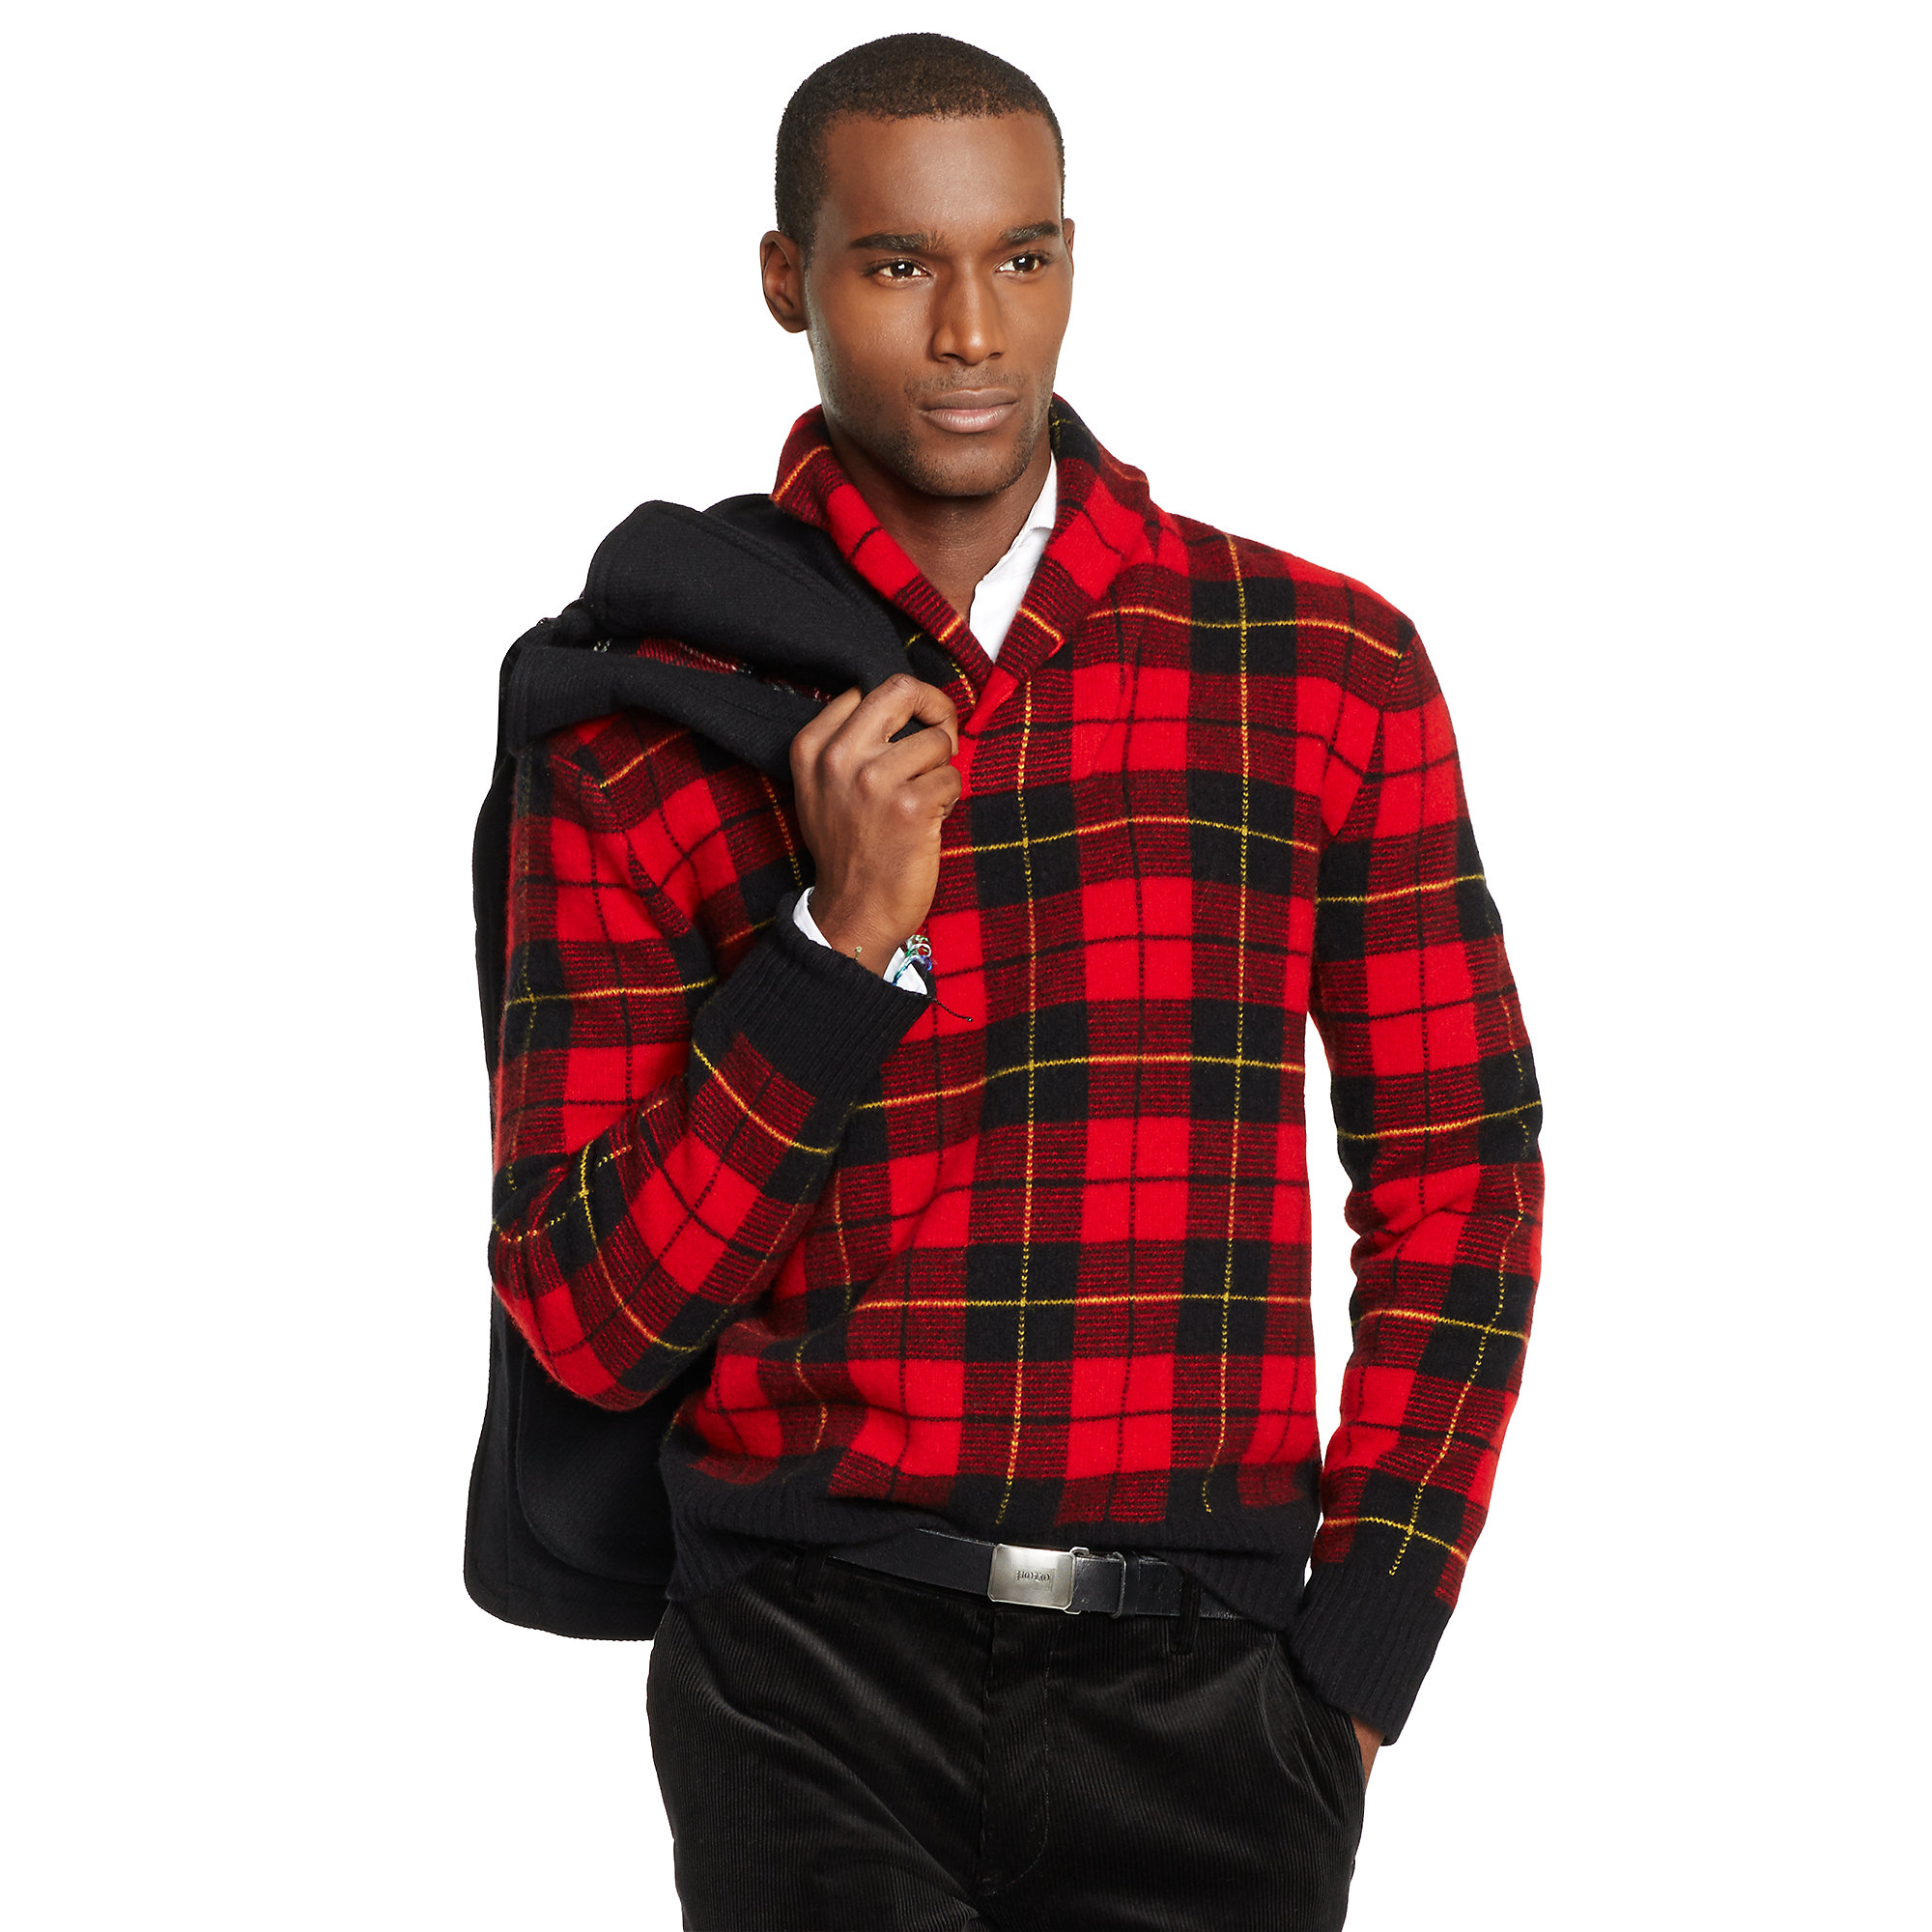 Lyst - Polo ralph lauren Plaid Shawl-Collar Sweater in Red for Men